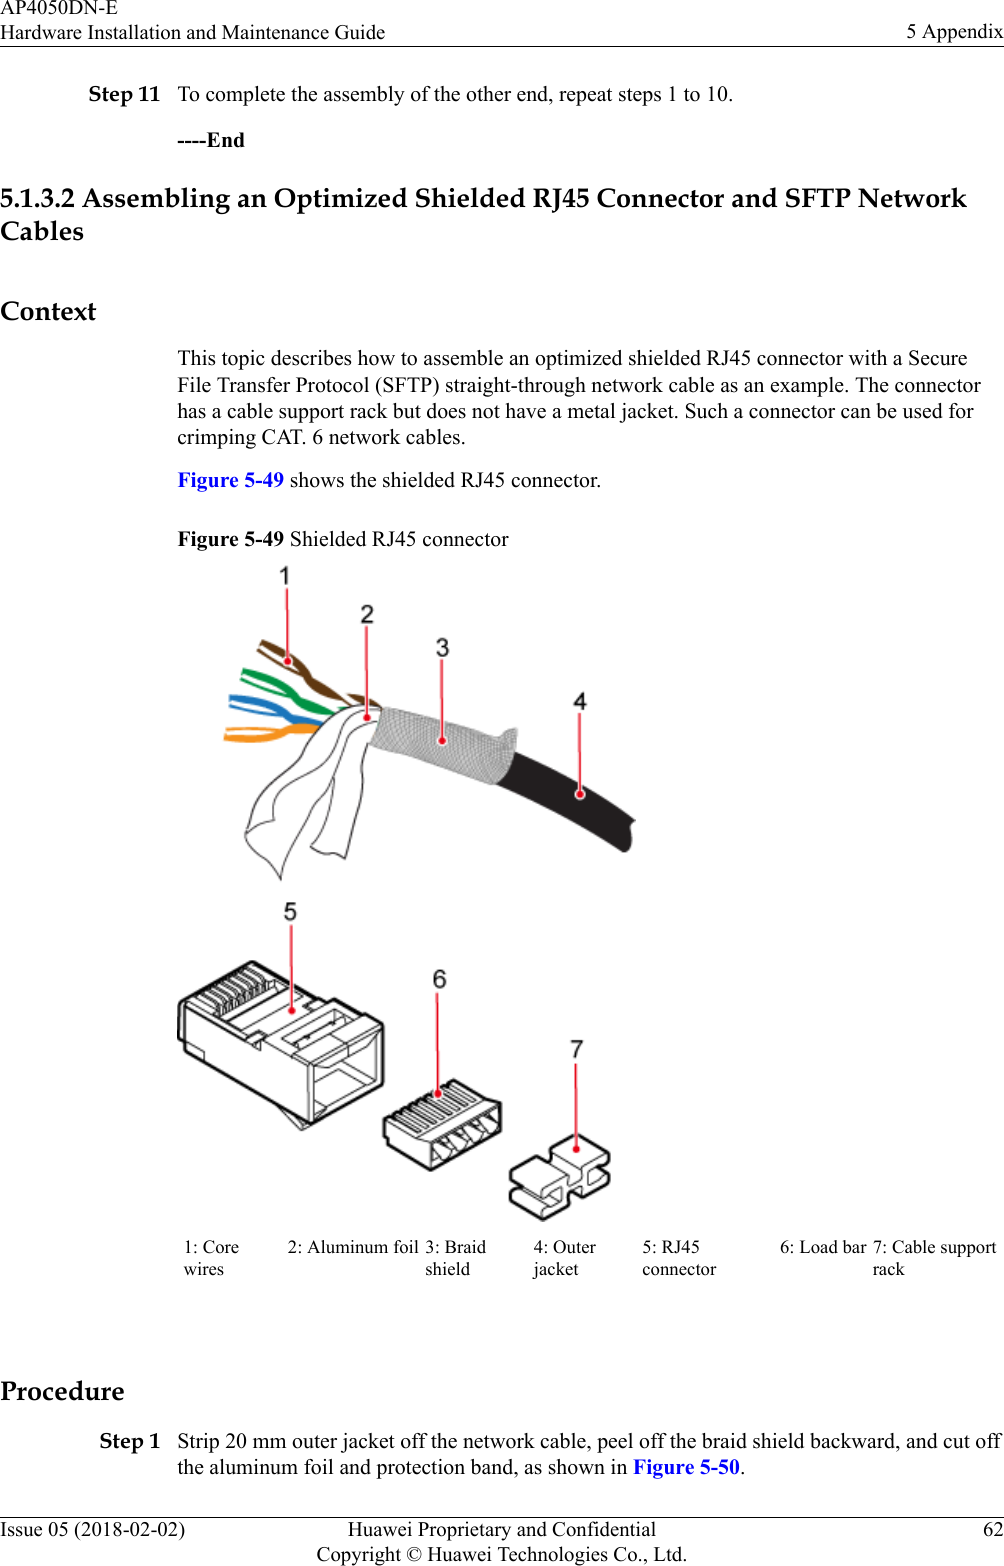 Step 11 To complete the assembly of the other end, repeat steps 1 to 10.----End5.1.3.2 Assembling an Optimized Shielded RJ45 Connector and SFTP NetworkCablesContextThis topic describes how to assemble an optimized shielded RJ45 connector with a SecureFile Transfer Protocol (SFTP) straight-through network cable as an example. The connectorhas a cable support rack but does not have a metal jacket. Such a connector can be used forcrimping CAT. 6 network cables.Figure 5-49 shows the shielded RJ45 connector.Figure 5-49 Shielded RJ45 connector1: Corewires2: Aluminum foil 3: Braidshield4: Outerjacket5: RJ45connector6: Load bar 7: Cable supportrack ProcedureStep 1 Strip 20 mm outer jacket off the network cable, peel off the braid shield backward, and cut offthe aluminum foil and protection band, as shown in Figure 5-50.AP4050DN-EHardware Installation and Maintenance Guide 5 AppendixIssue 05 (2018-02-02) Huawei Proprietary and ConfidentialCopyright © Huawei Technologies Co., Ltd.62